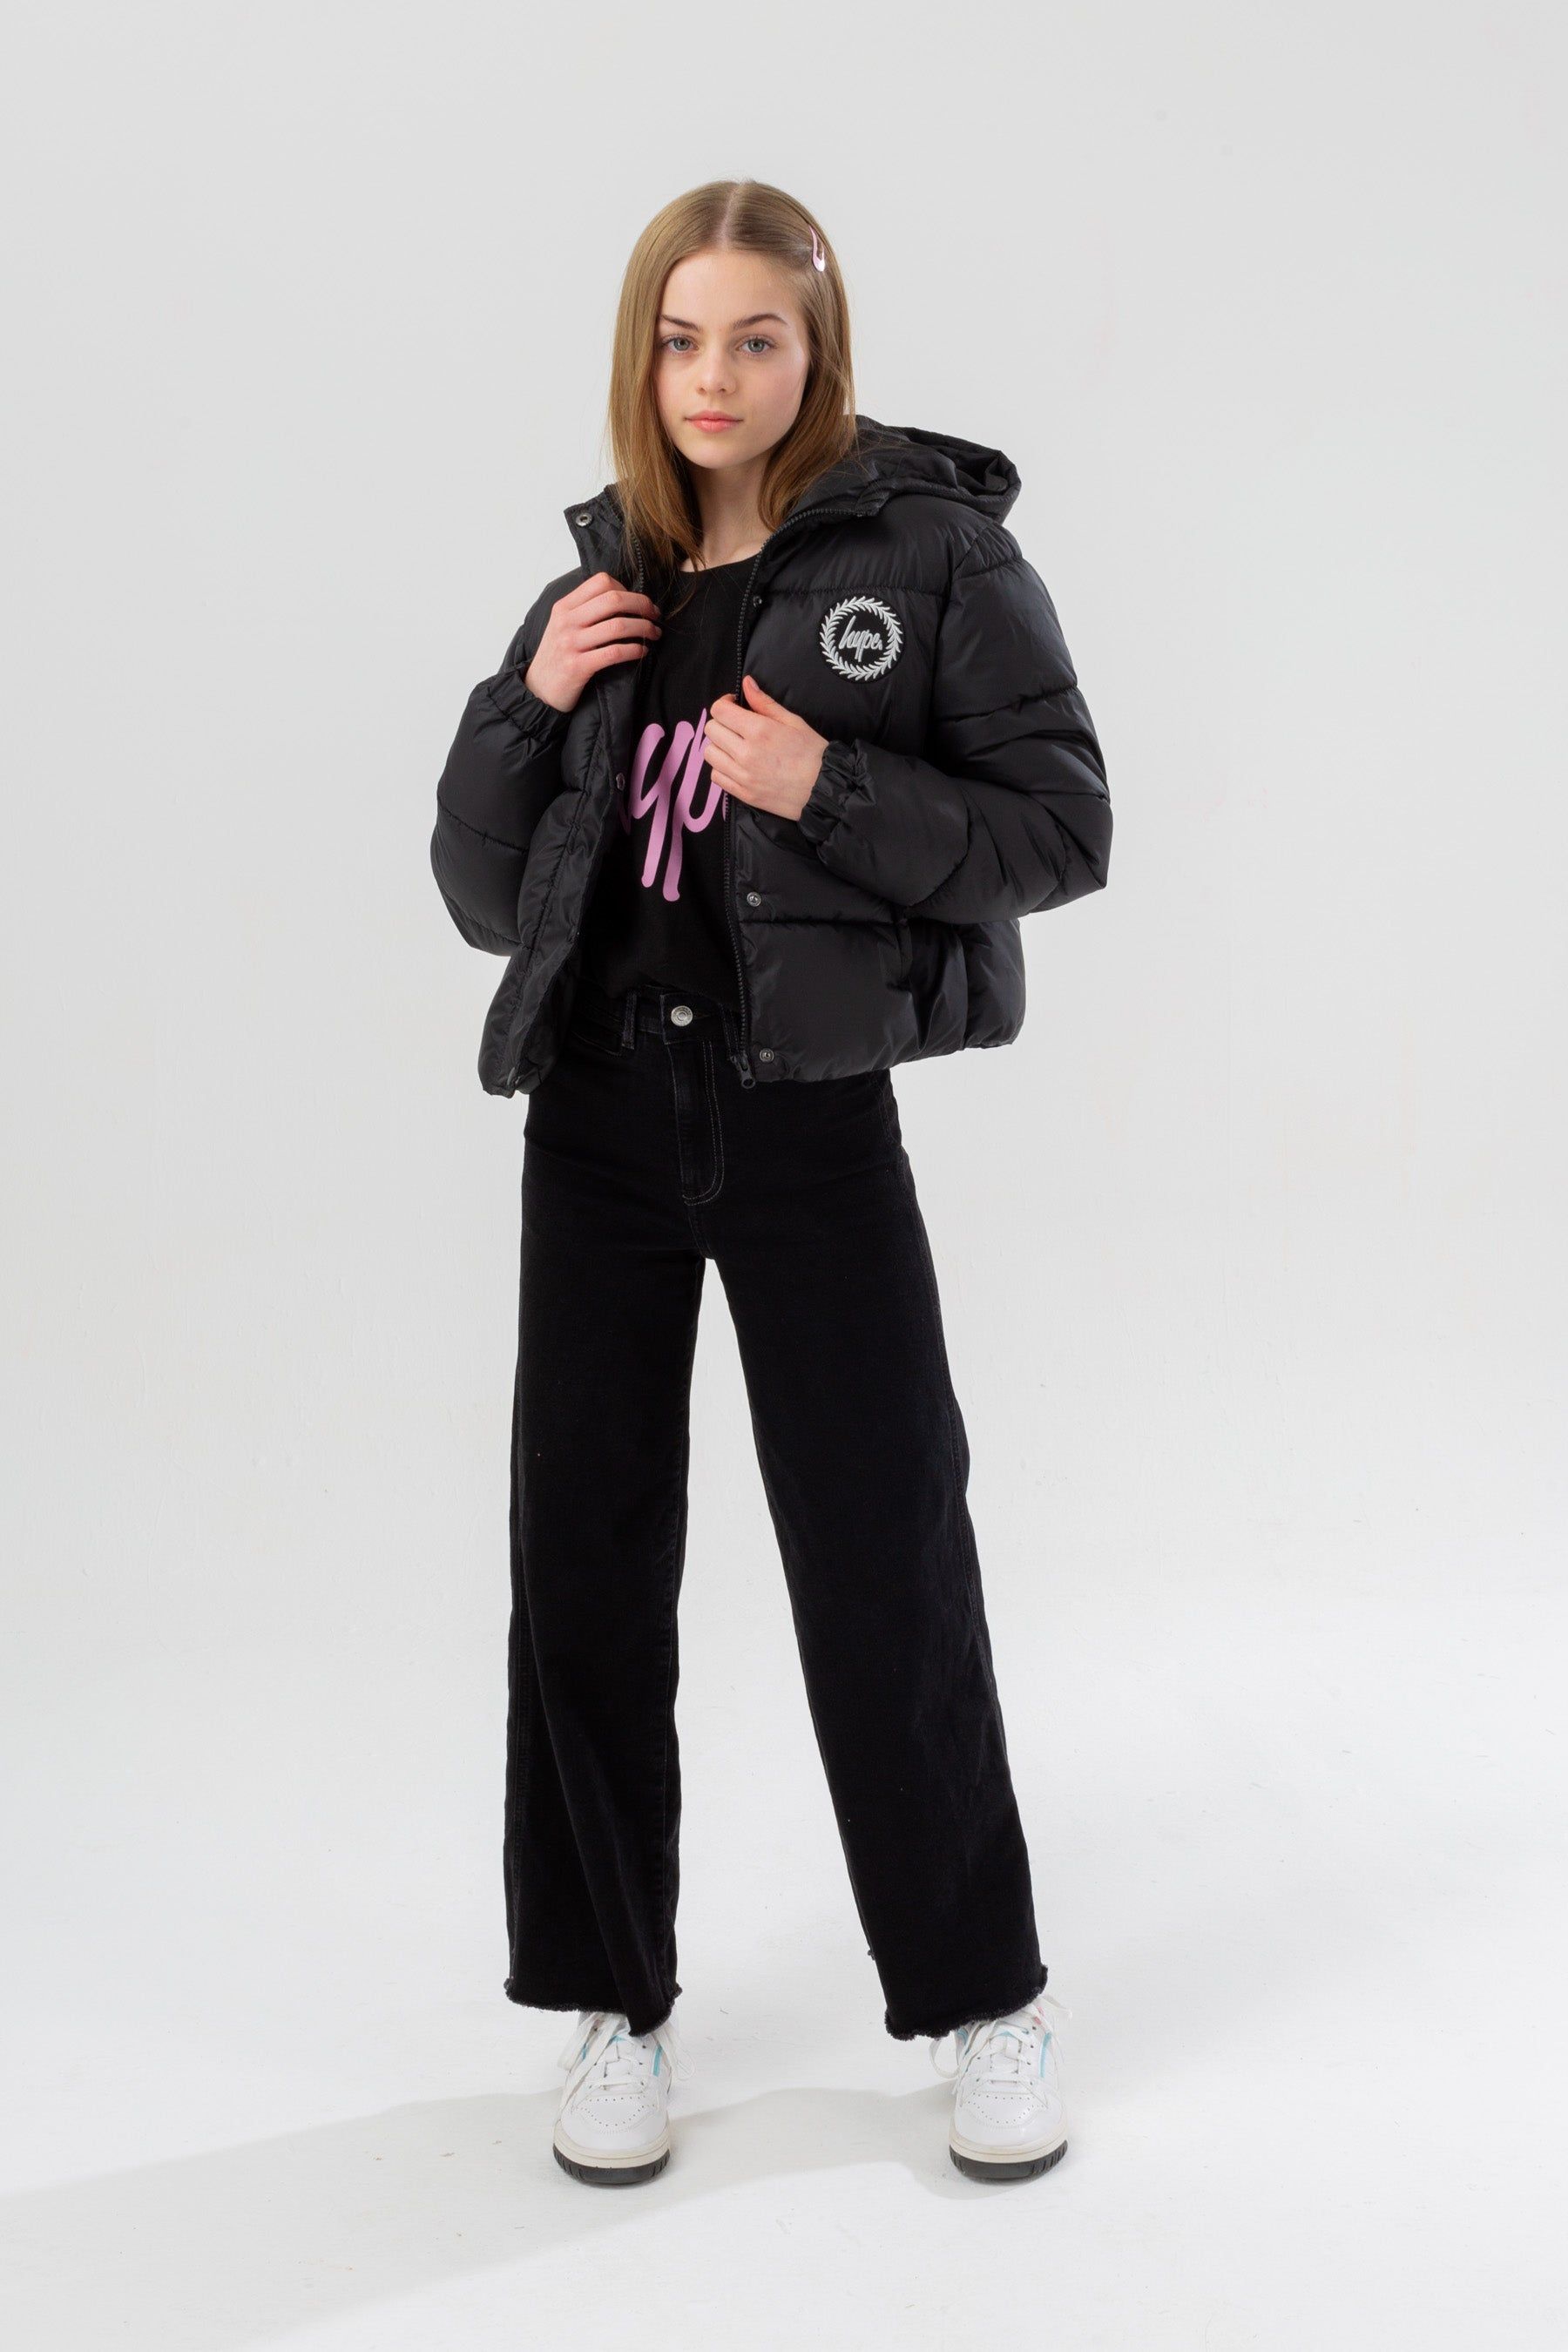 Meet the HYPE. Girls Black Cropped Kids Puffer Jacket, part of the HYPE. 2022 Back to School collection. The coat is designed in our standard cropped puffer shape in a classic black. Finished with padding, the iconic HYPE. crest badge logo in a contrasting monochrome, and two zip pockets on the front. Machine washable.